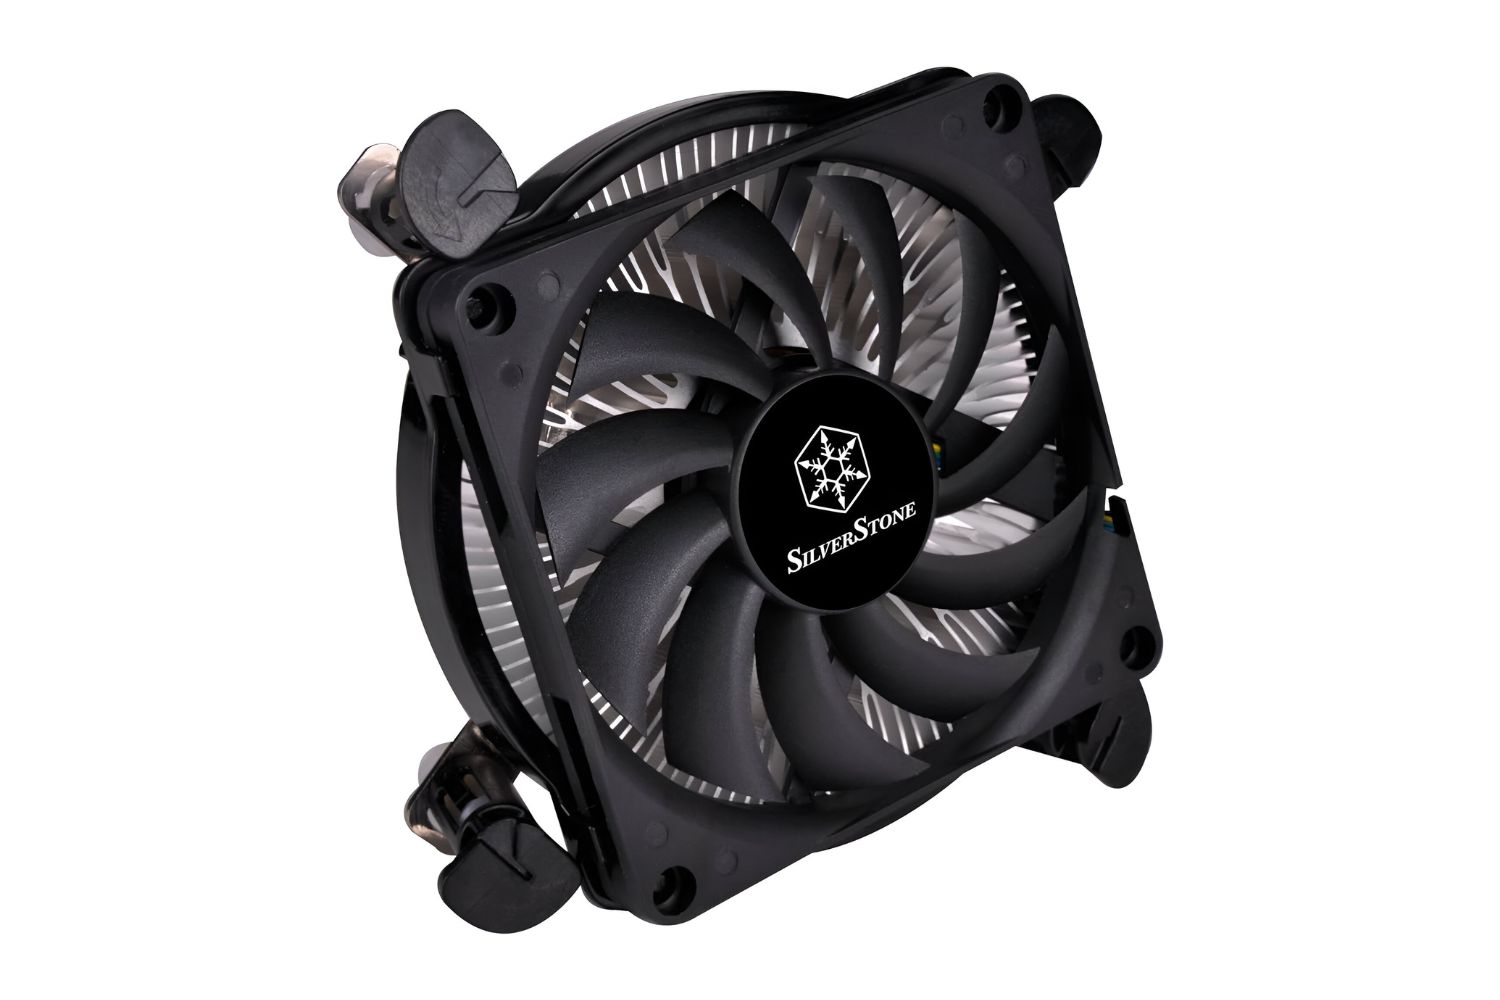 What Is A Good CPU Cooler Fan RPM For An Intel I5 4430